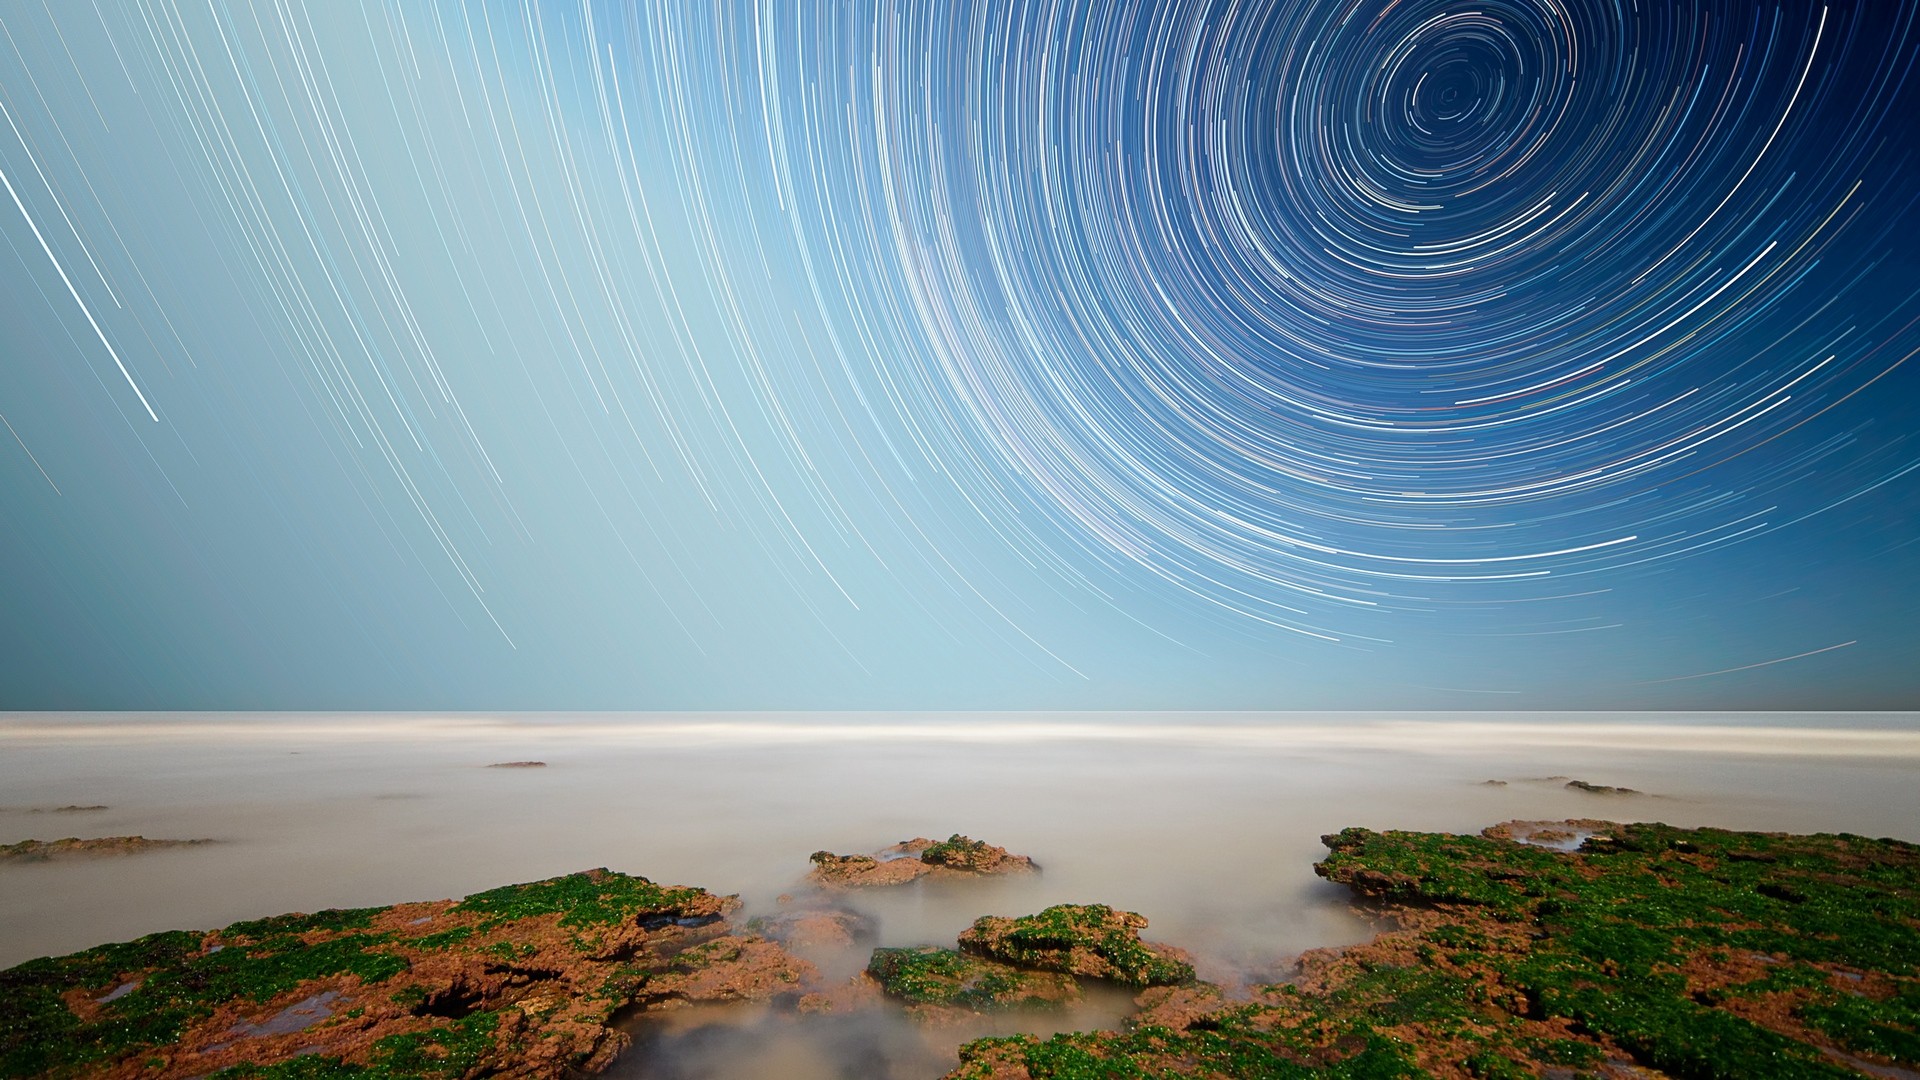 General 1920x1080 nature star trails long exposure water sky landscape